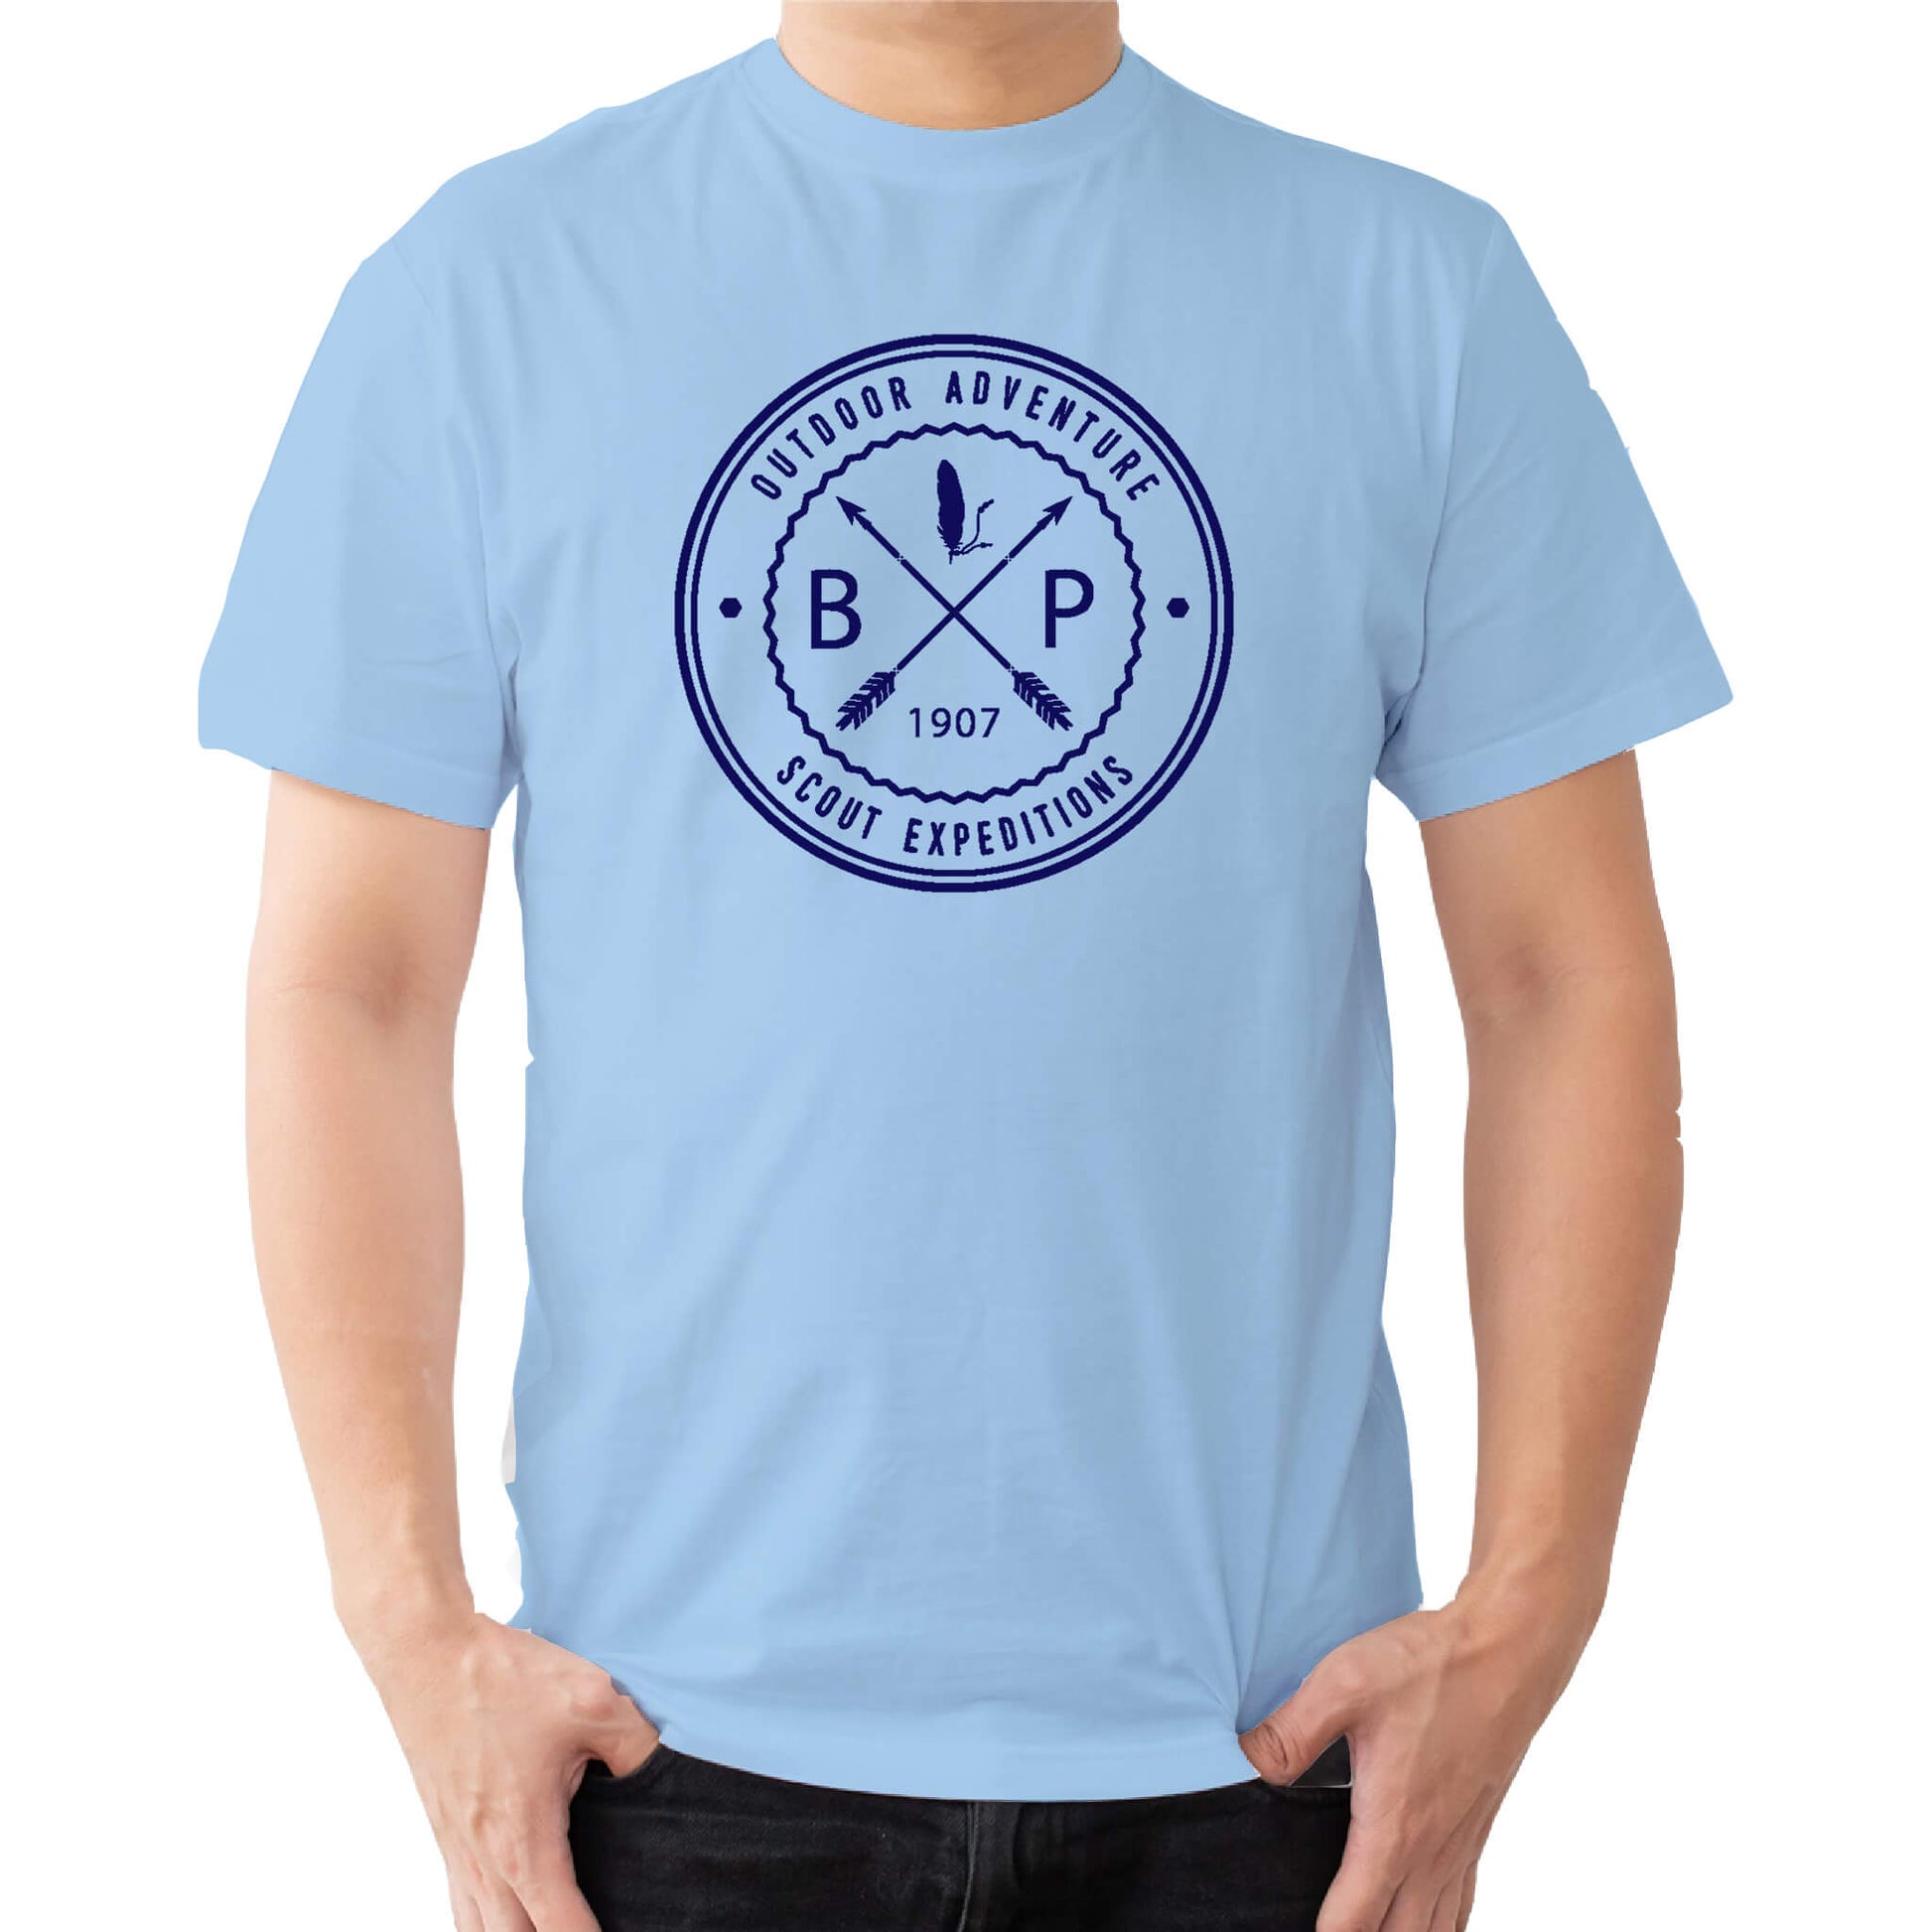 a  t shirt with the text out door adveture scout expeditions BP 1907 with crossed arrows.